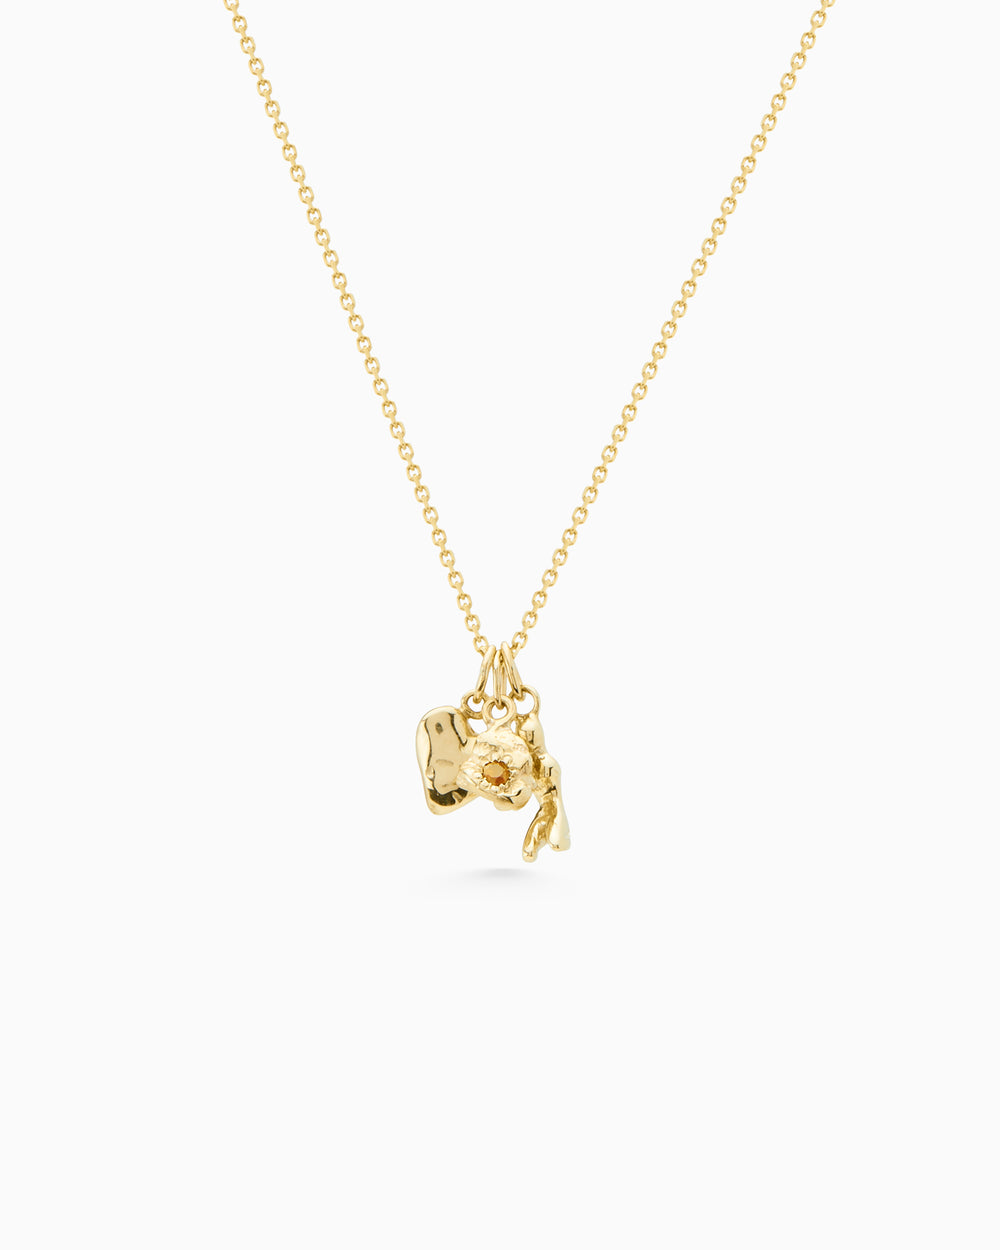 Heart Pendant | Solid Gold